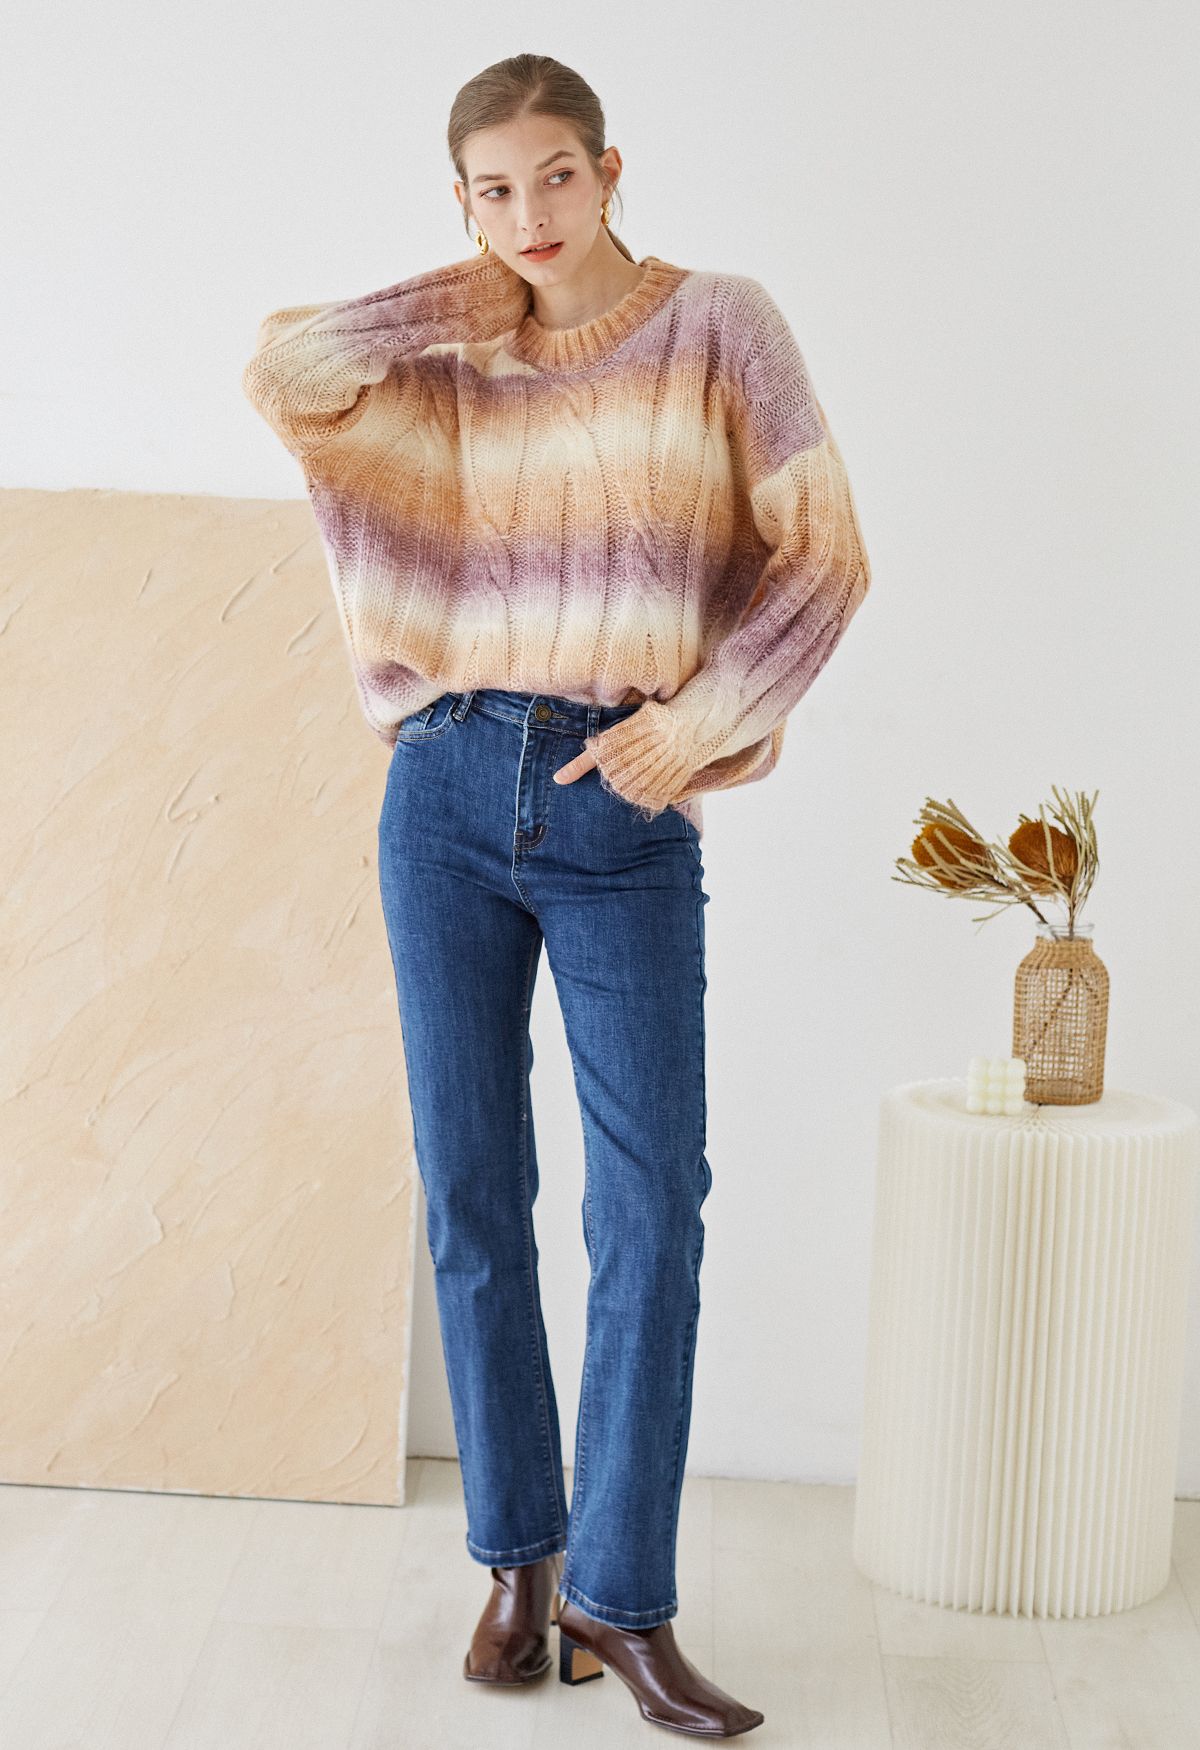 Ombre Braided Knit Round Neck Sweater - Retro, Indie and Unique Fashion